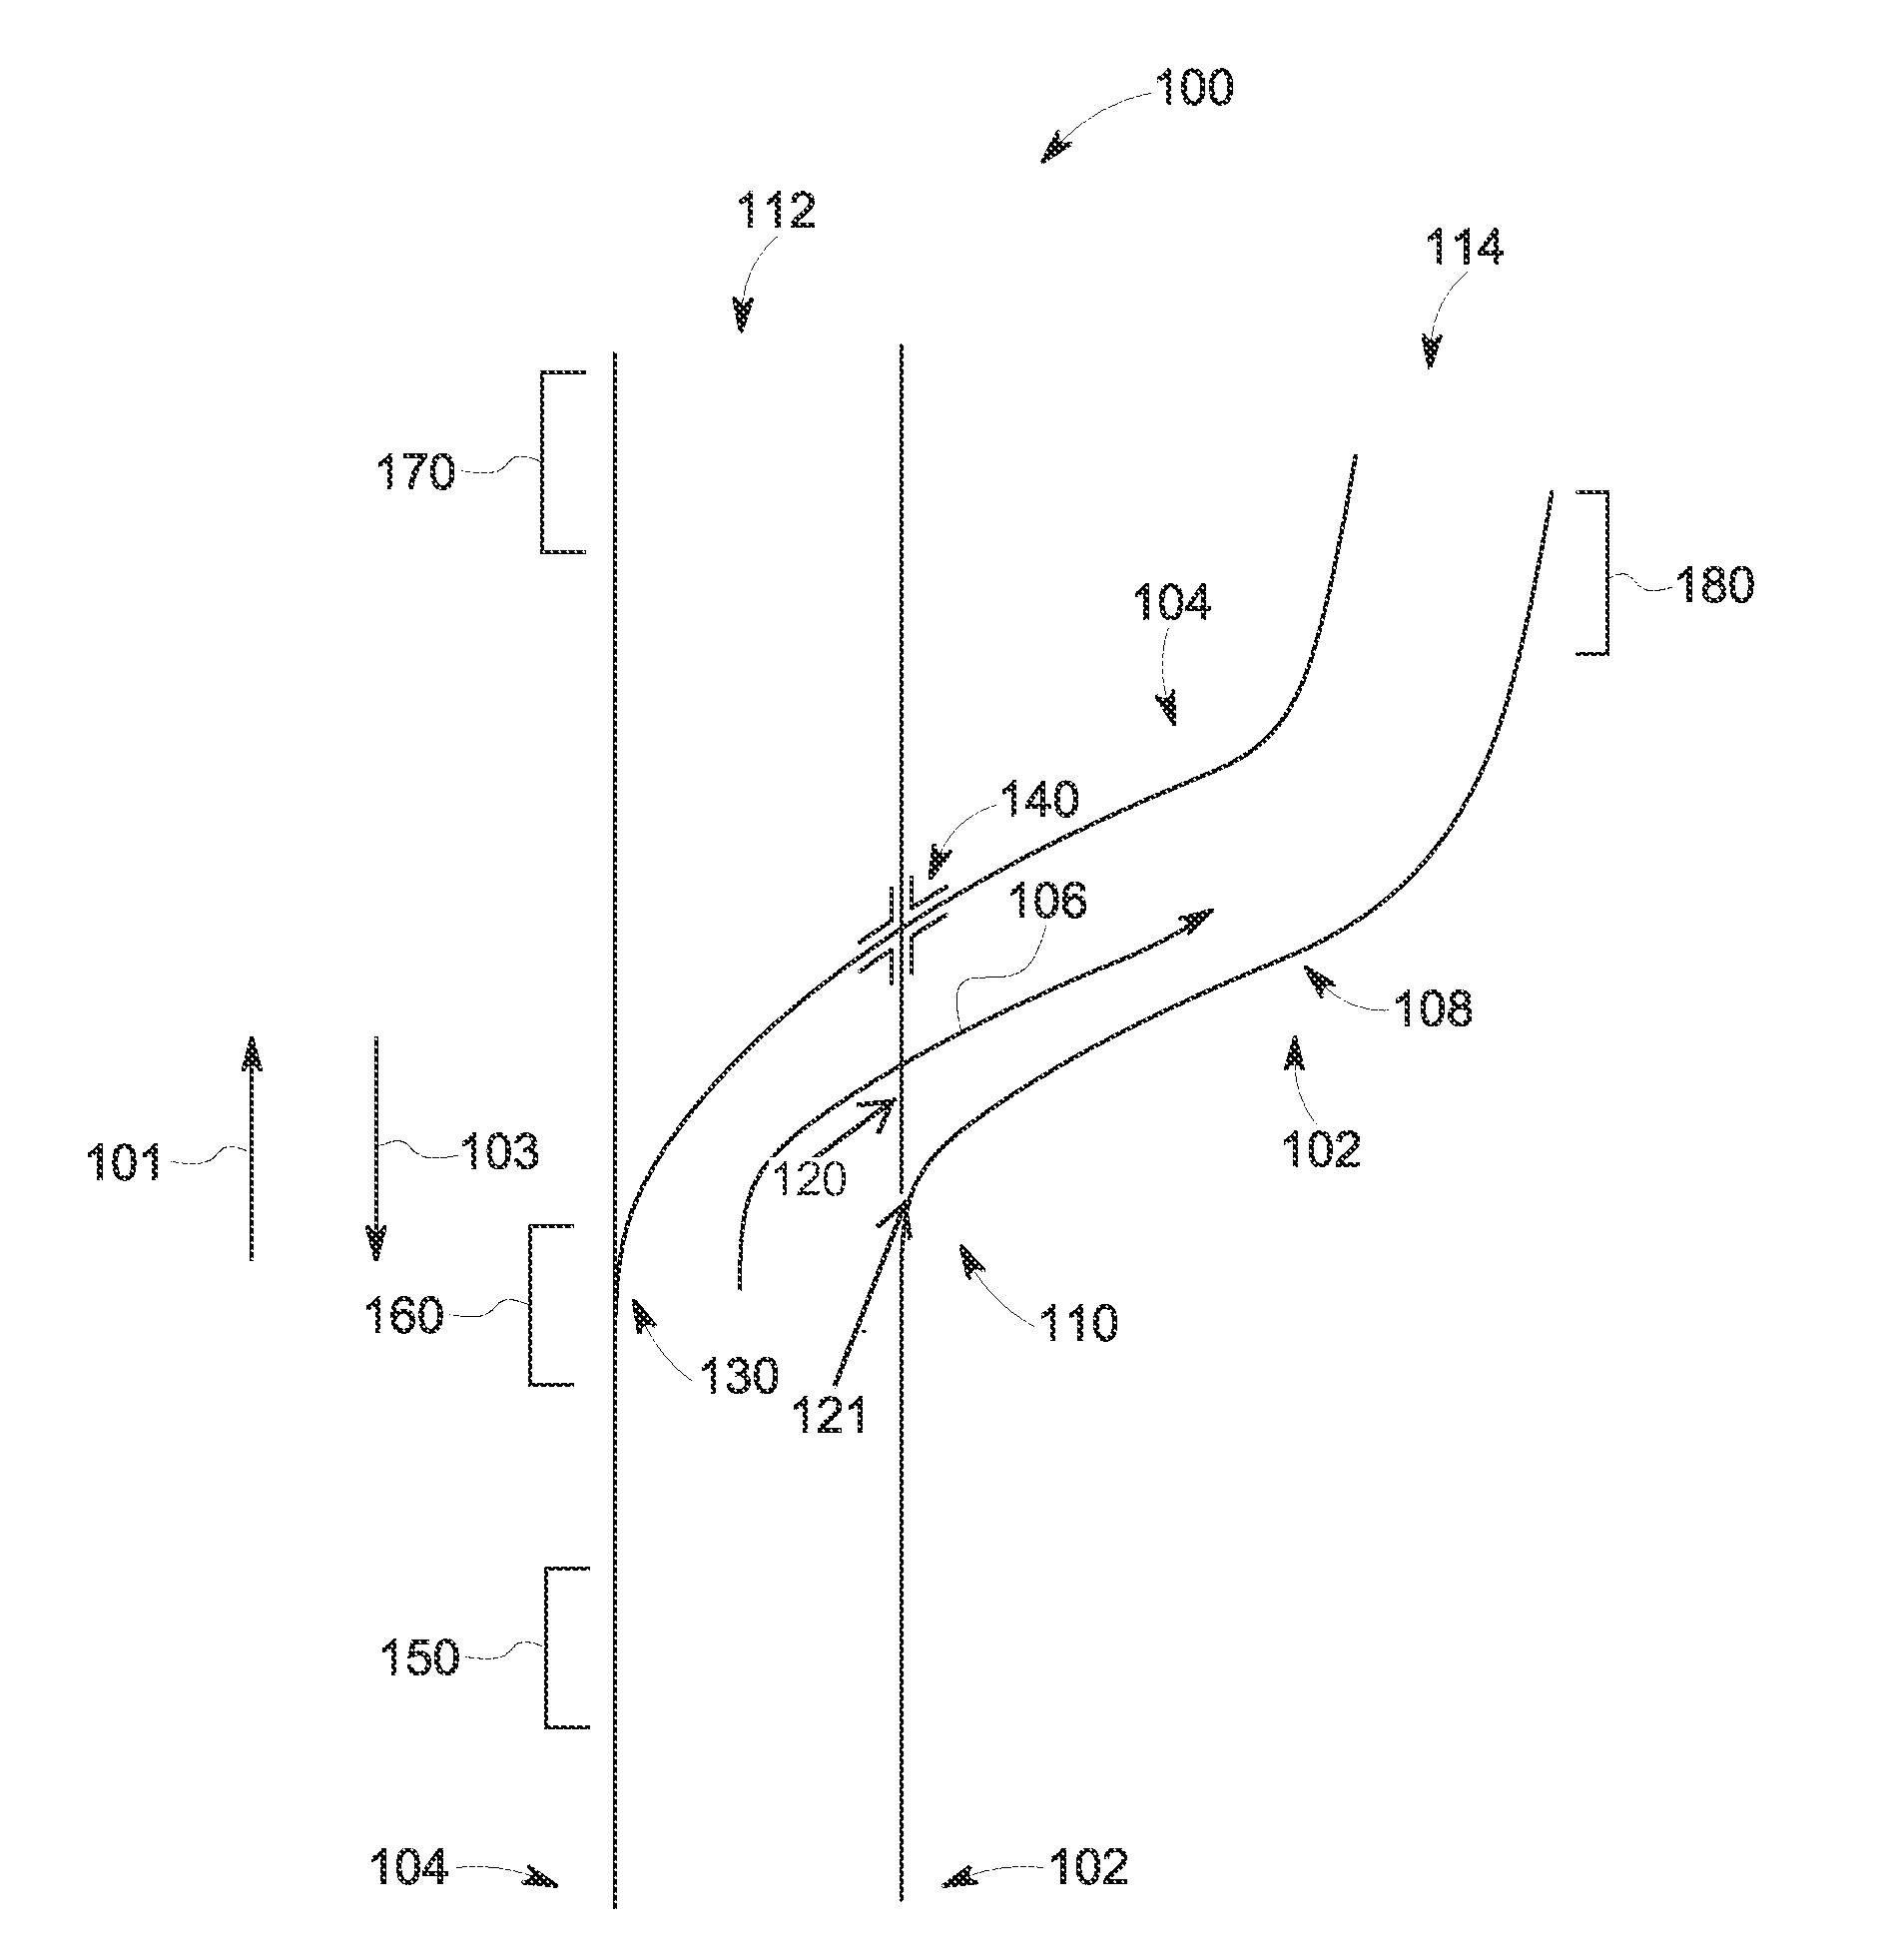 Route feature identification system and method